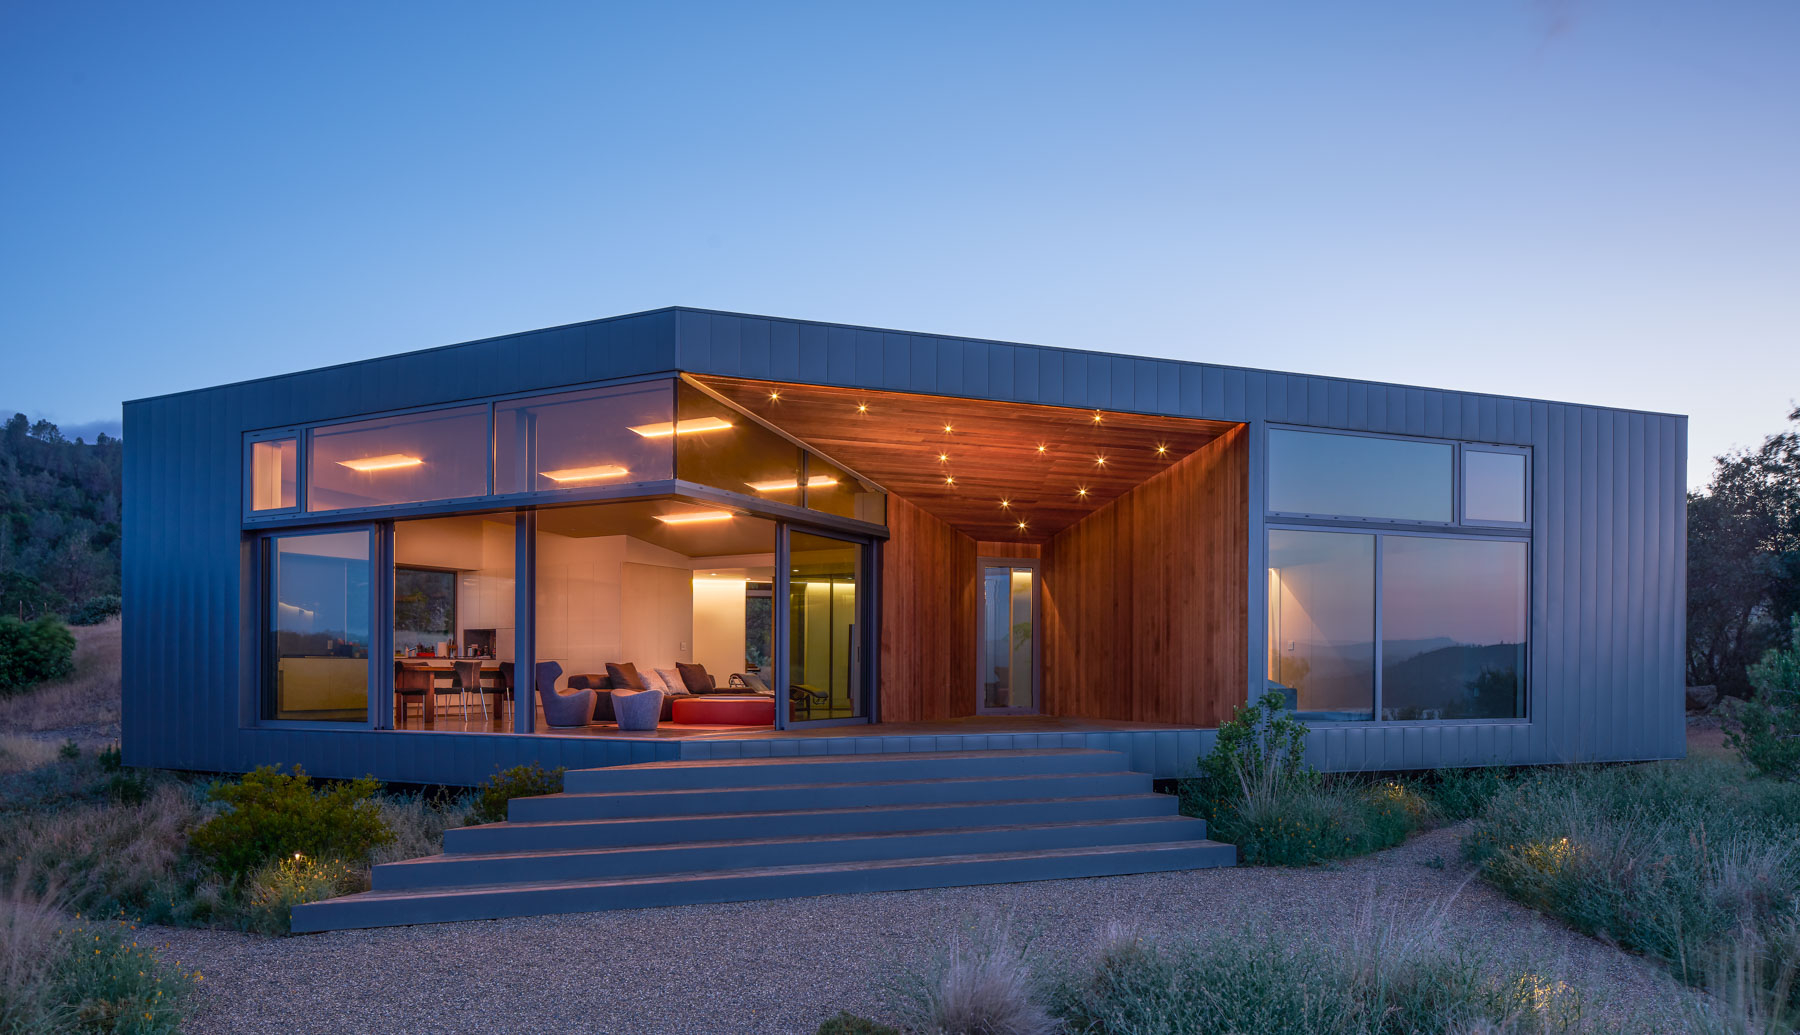 Iwamotoscott Architecture, Centric Builders, Private Residence, NorCal